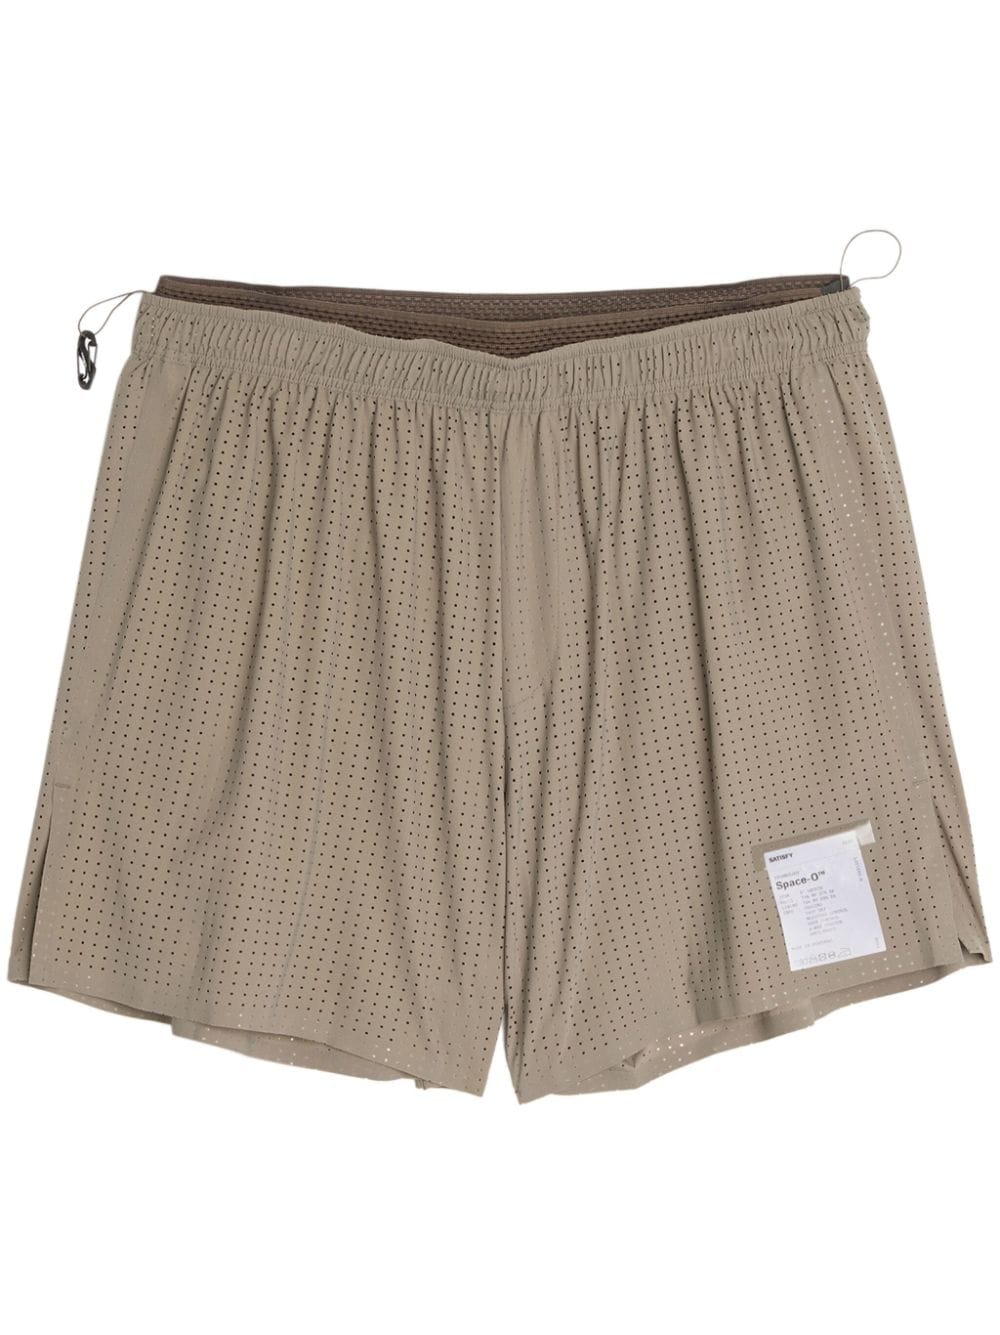 Satisfy Space-o Tm 5" Shorts In Neutral